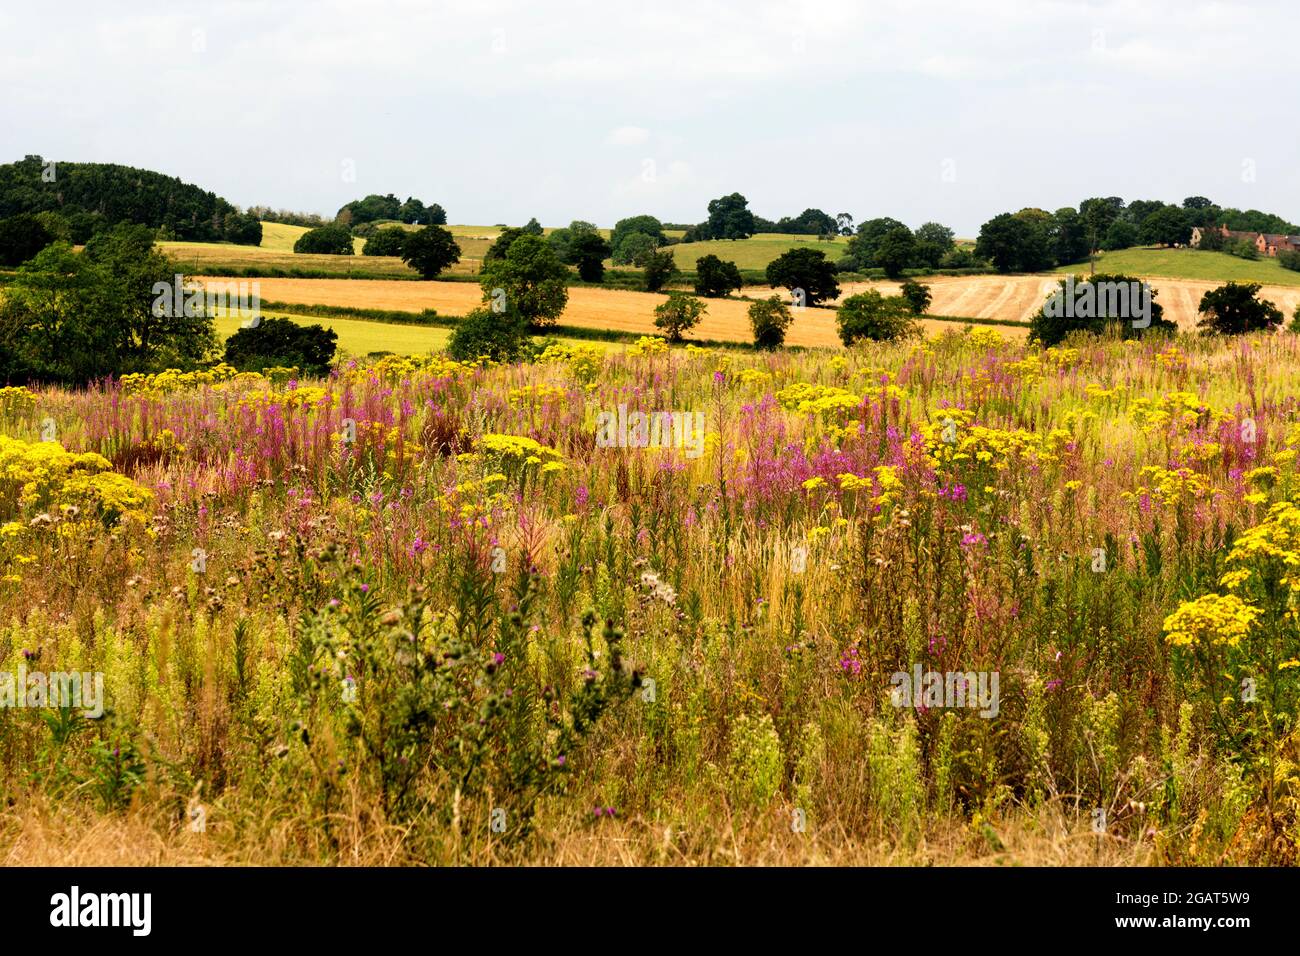 Agricultural land, uncultivated and covered in weed, Warwickshire, UK Stock Photo